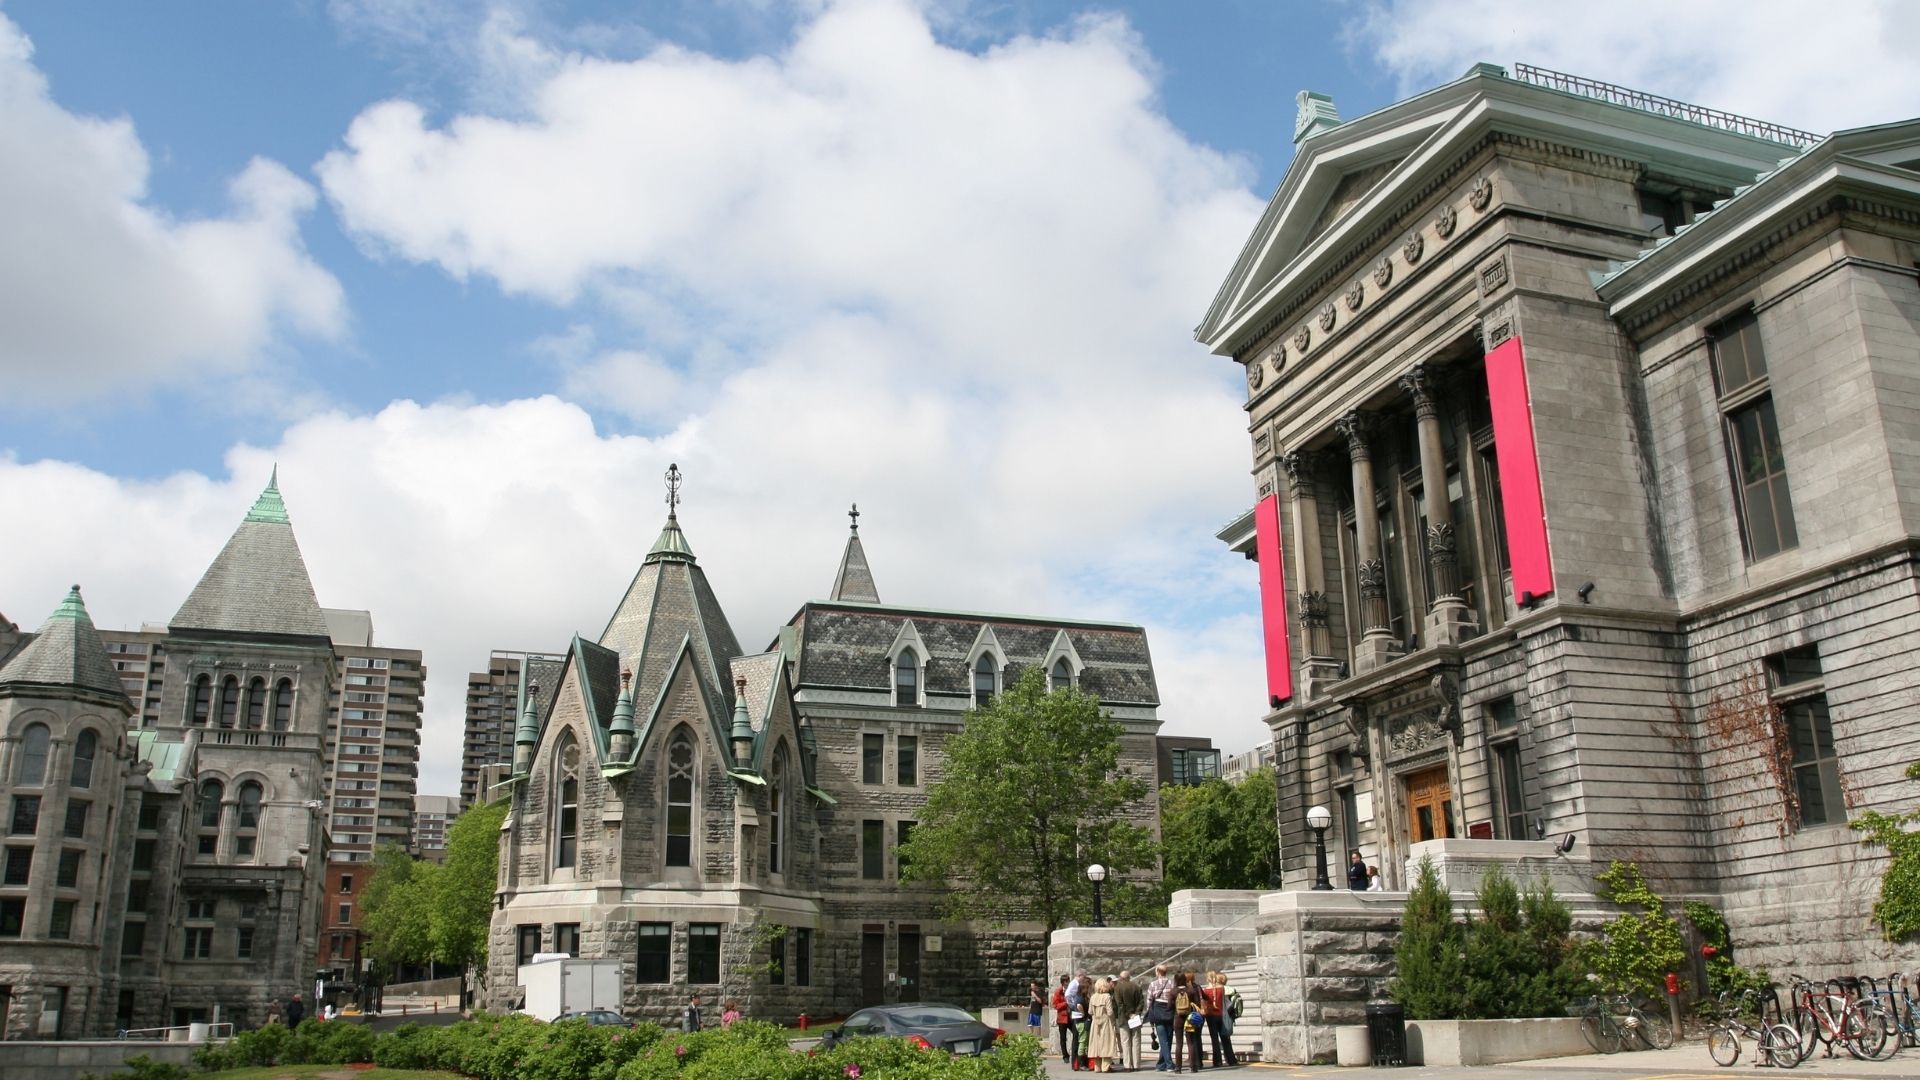 One of the law schools in Canada is featured with students taking a guided tour